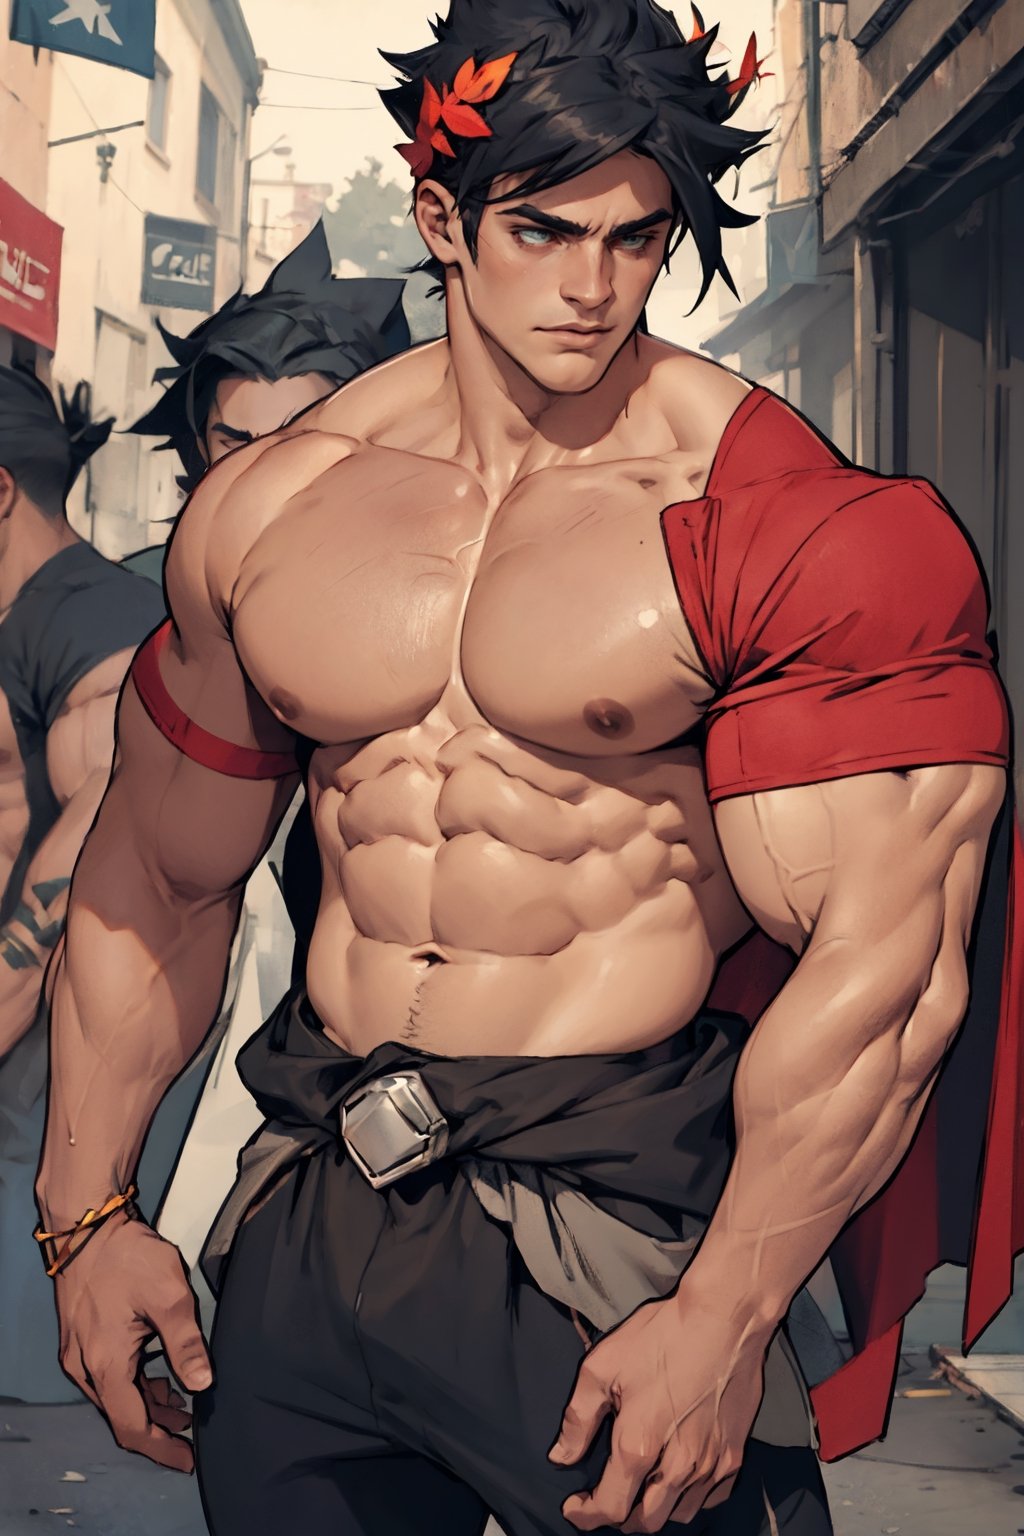 Zagreus with big muscles 